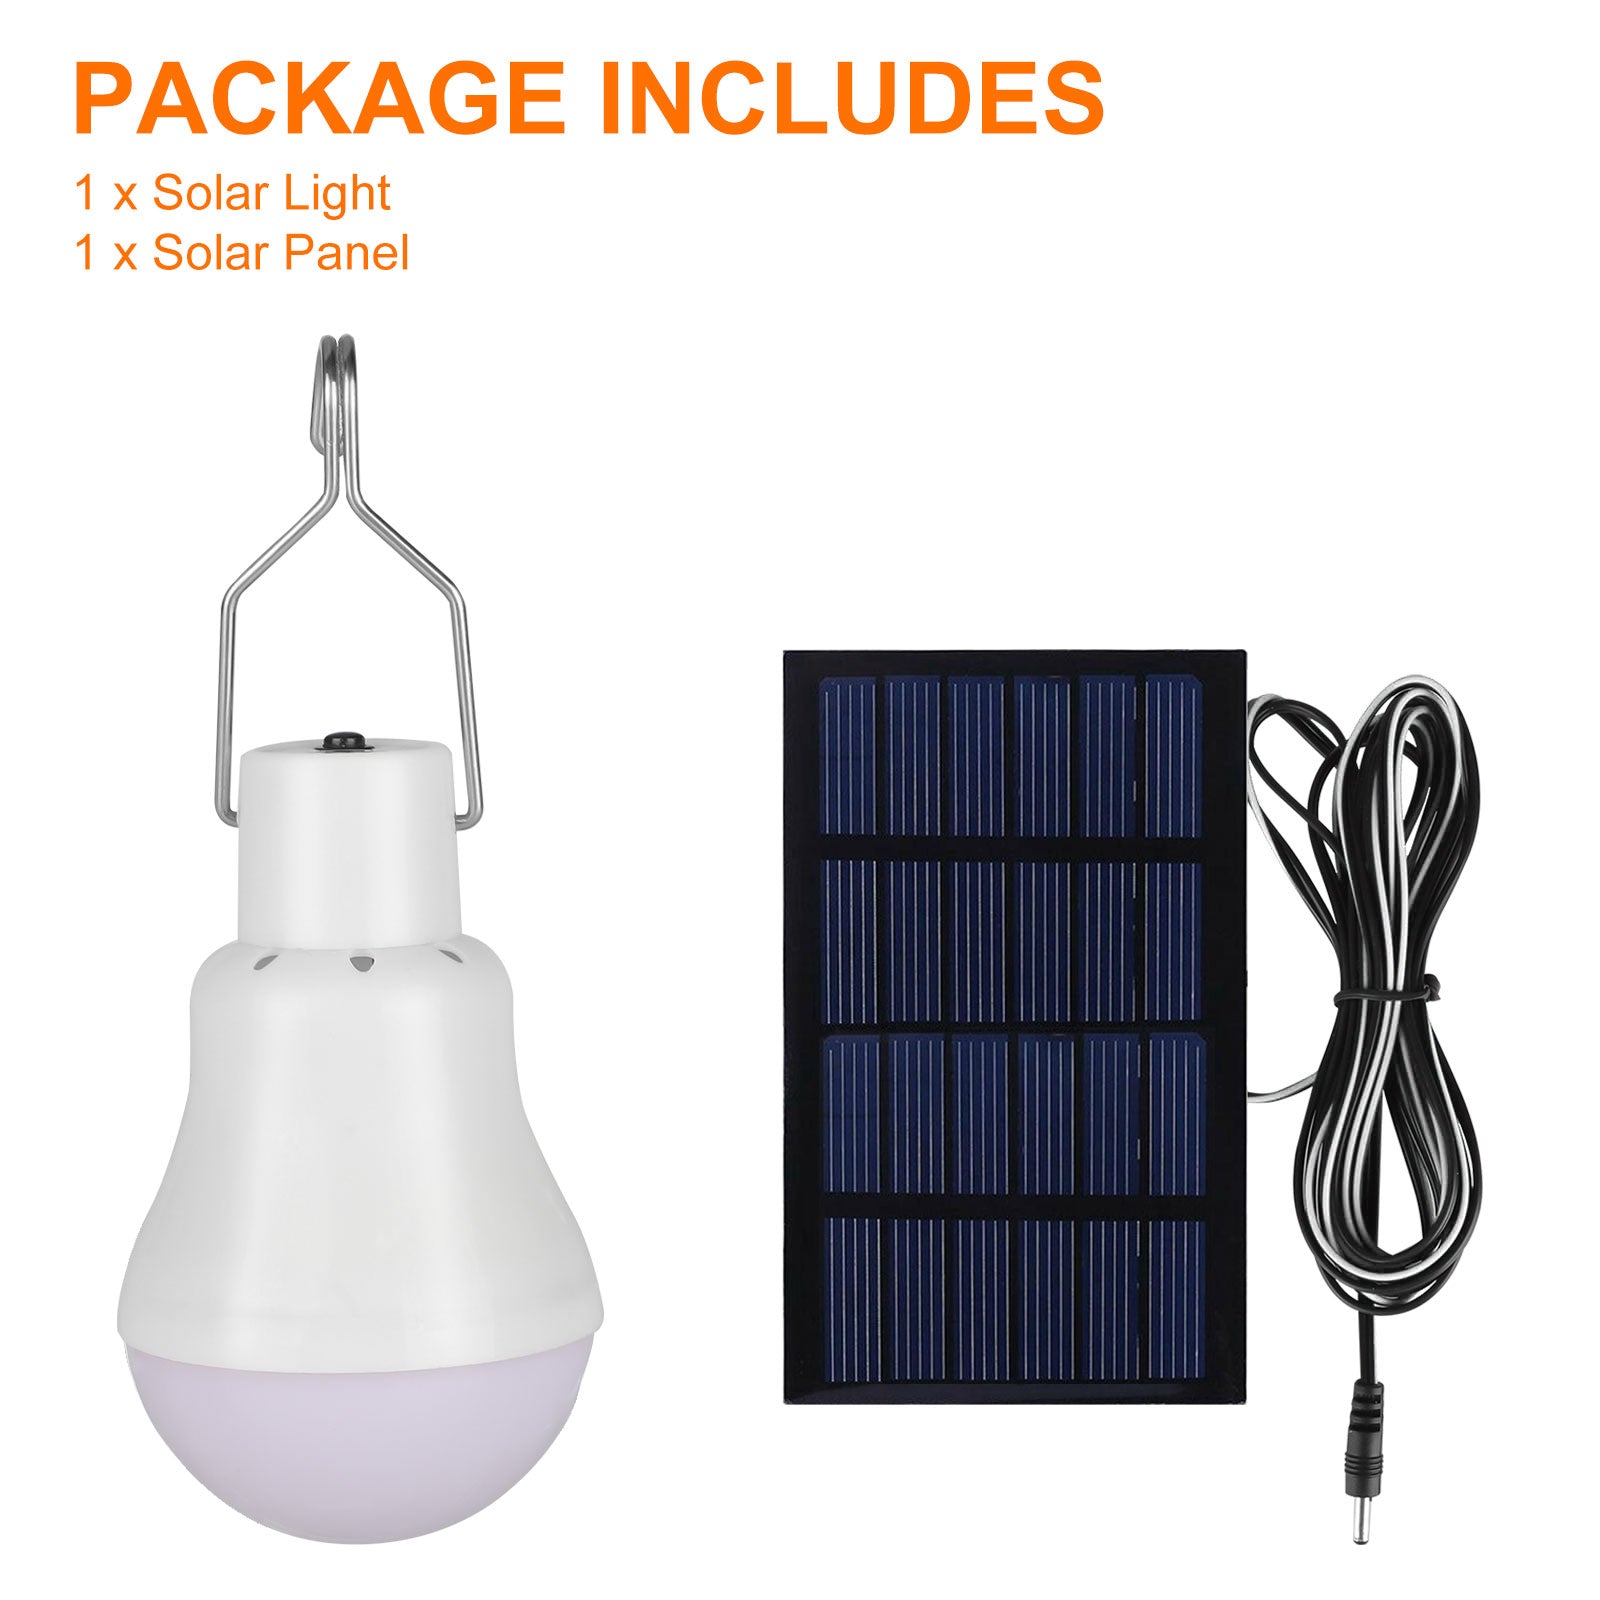 Portable Solar LED Light Bulb， EEEkit Solar Powered Panel LED Lamp Lighting for Outdoor Hiking Fishing Camping Tent Emergency Use， Chicken Coop Lamp Lights